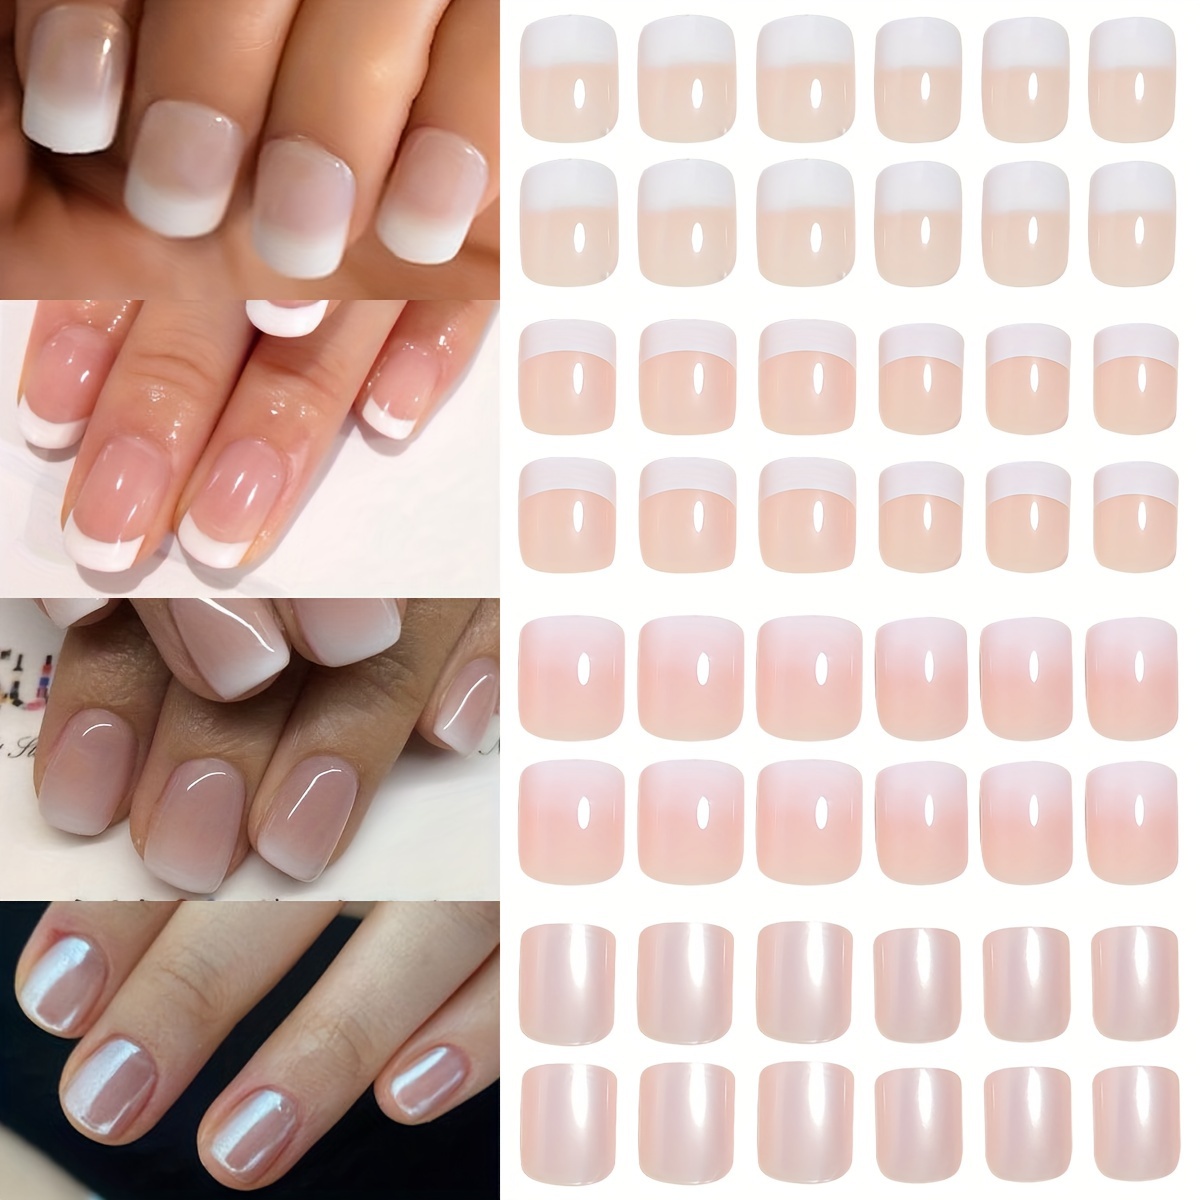 

96 Pieces (4 Colors) Short Square Press-on Nails Acrylic Short Fake Nails Full Coverage White French Design Glitter Fake Nails